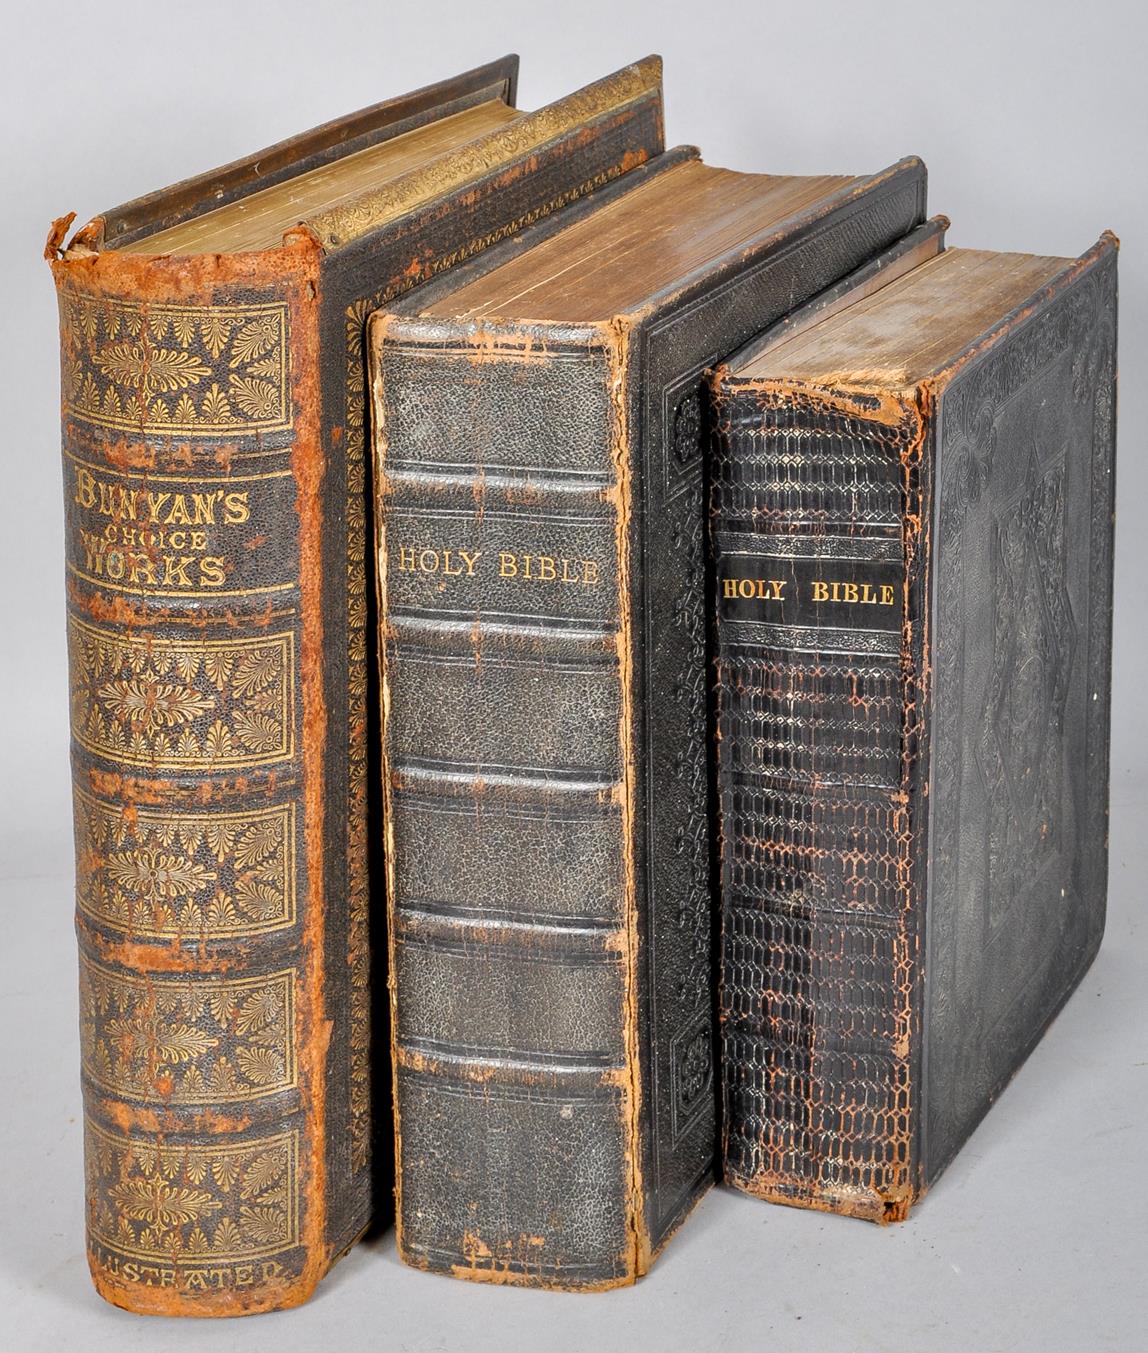 Two 19th Century leather bound Bibles along with a similar period Bunyan's Choice Works leather book